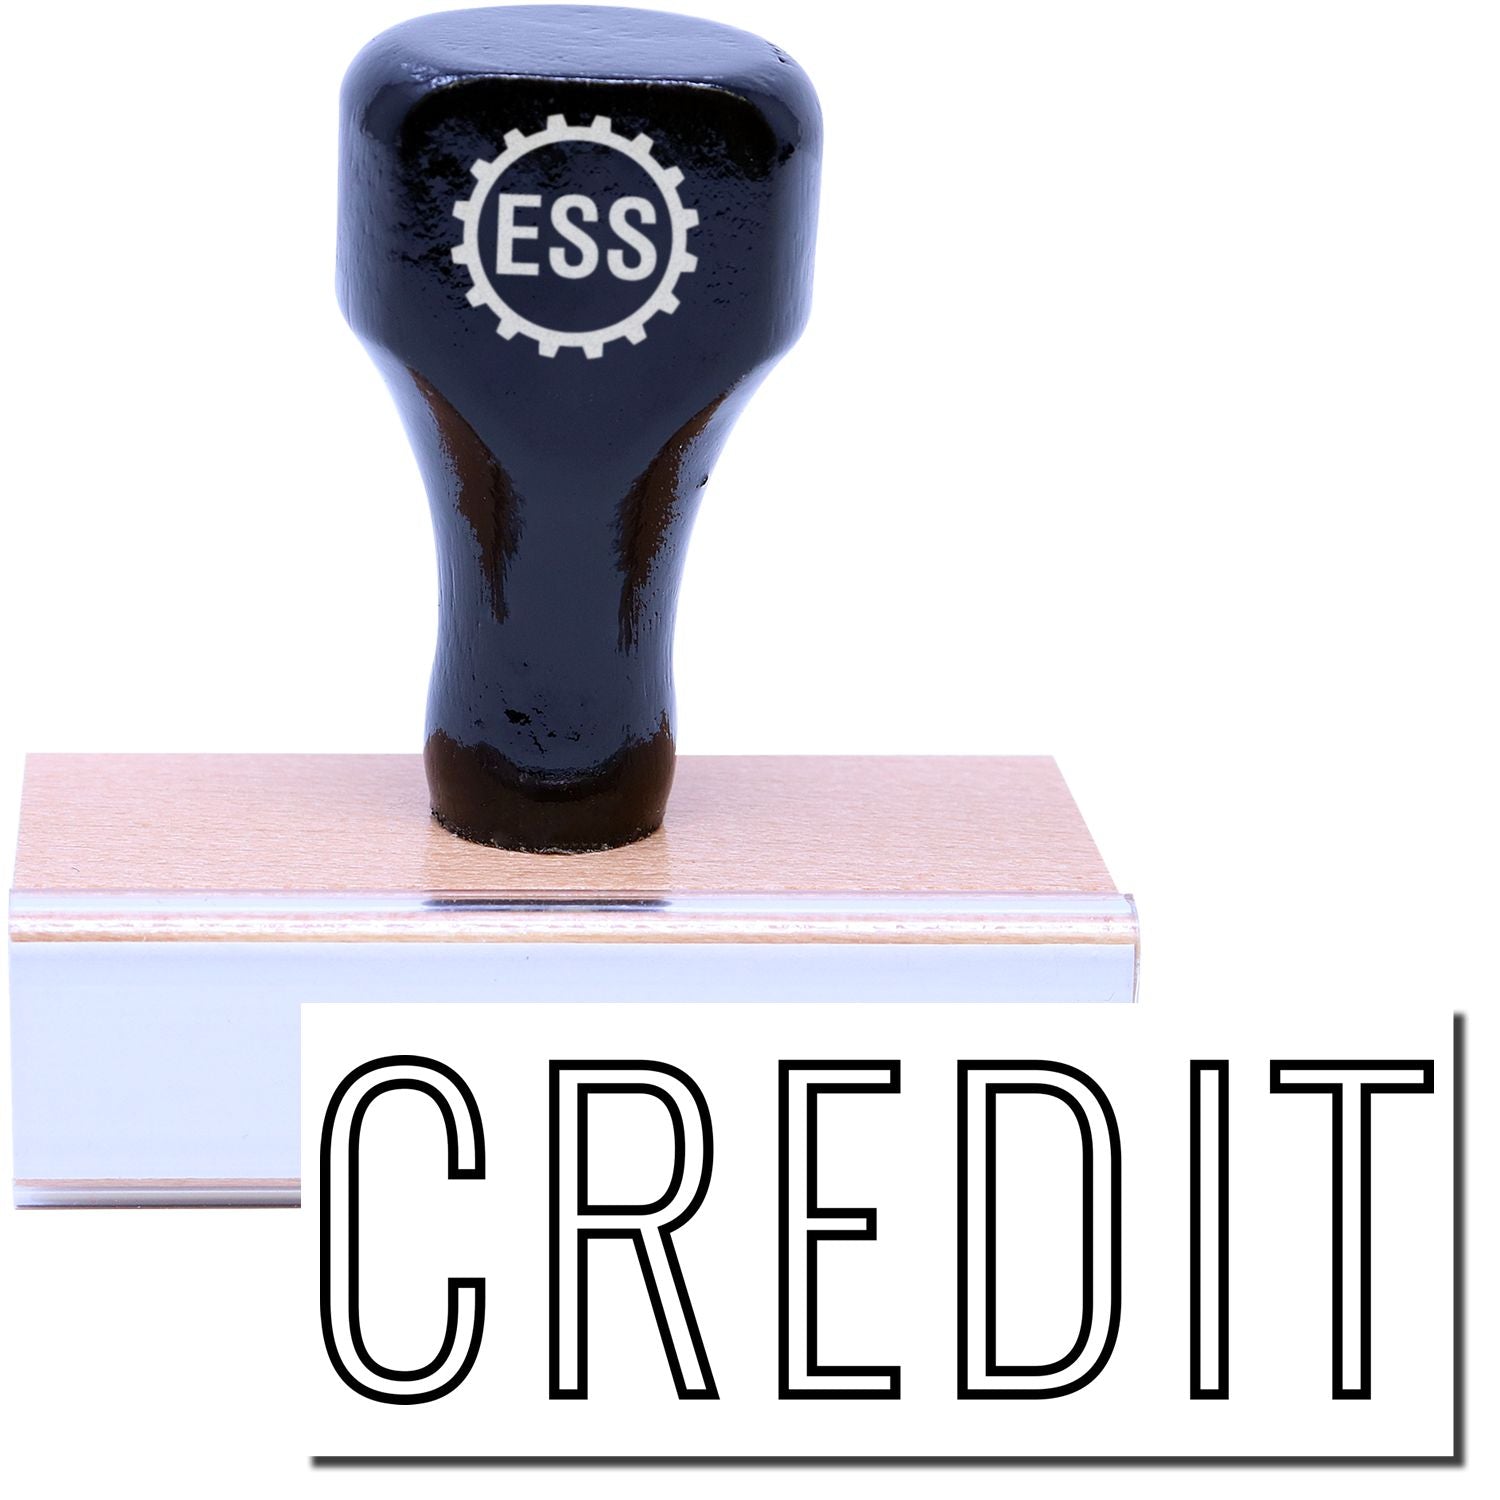 A stock office rubber stamp with a stamped image showing how the text "CREDIT" in an outline font is displayed after stamping.